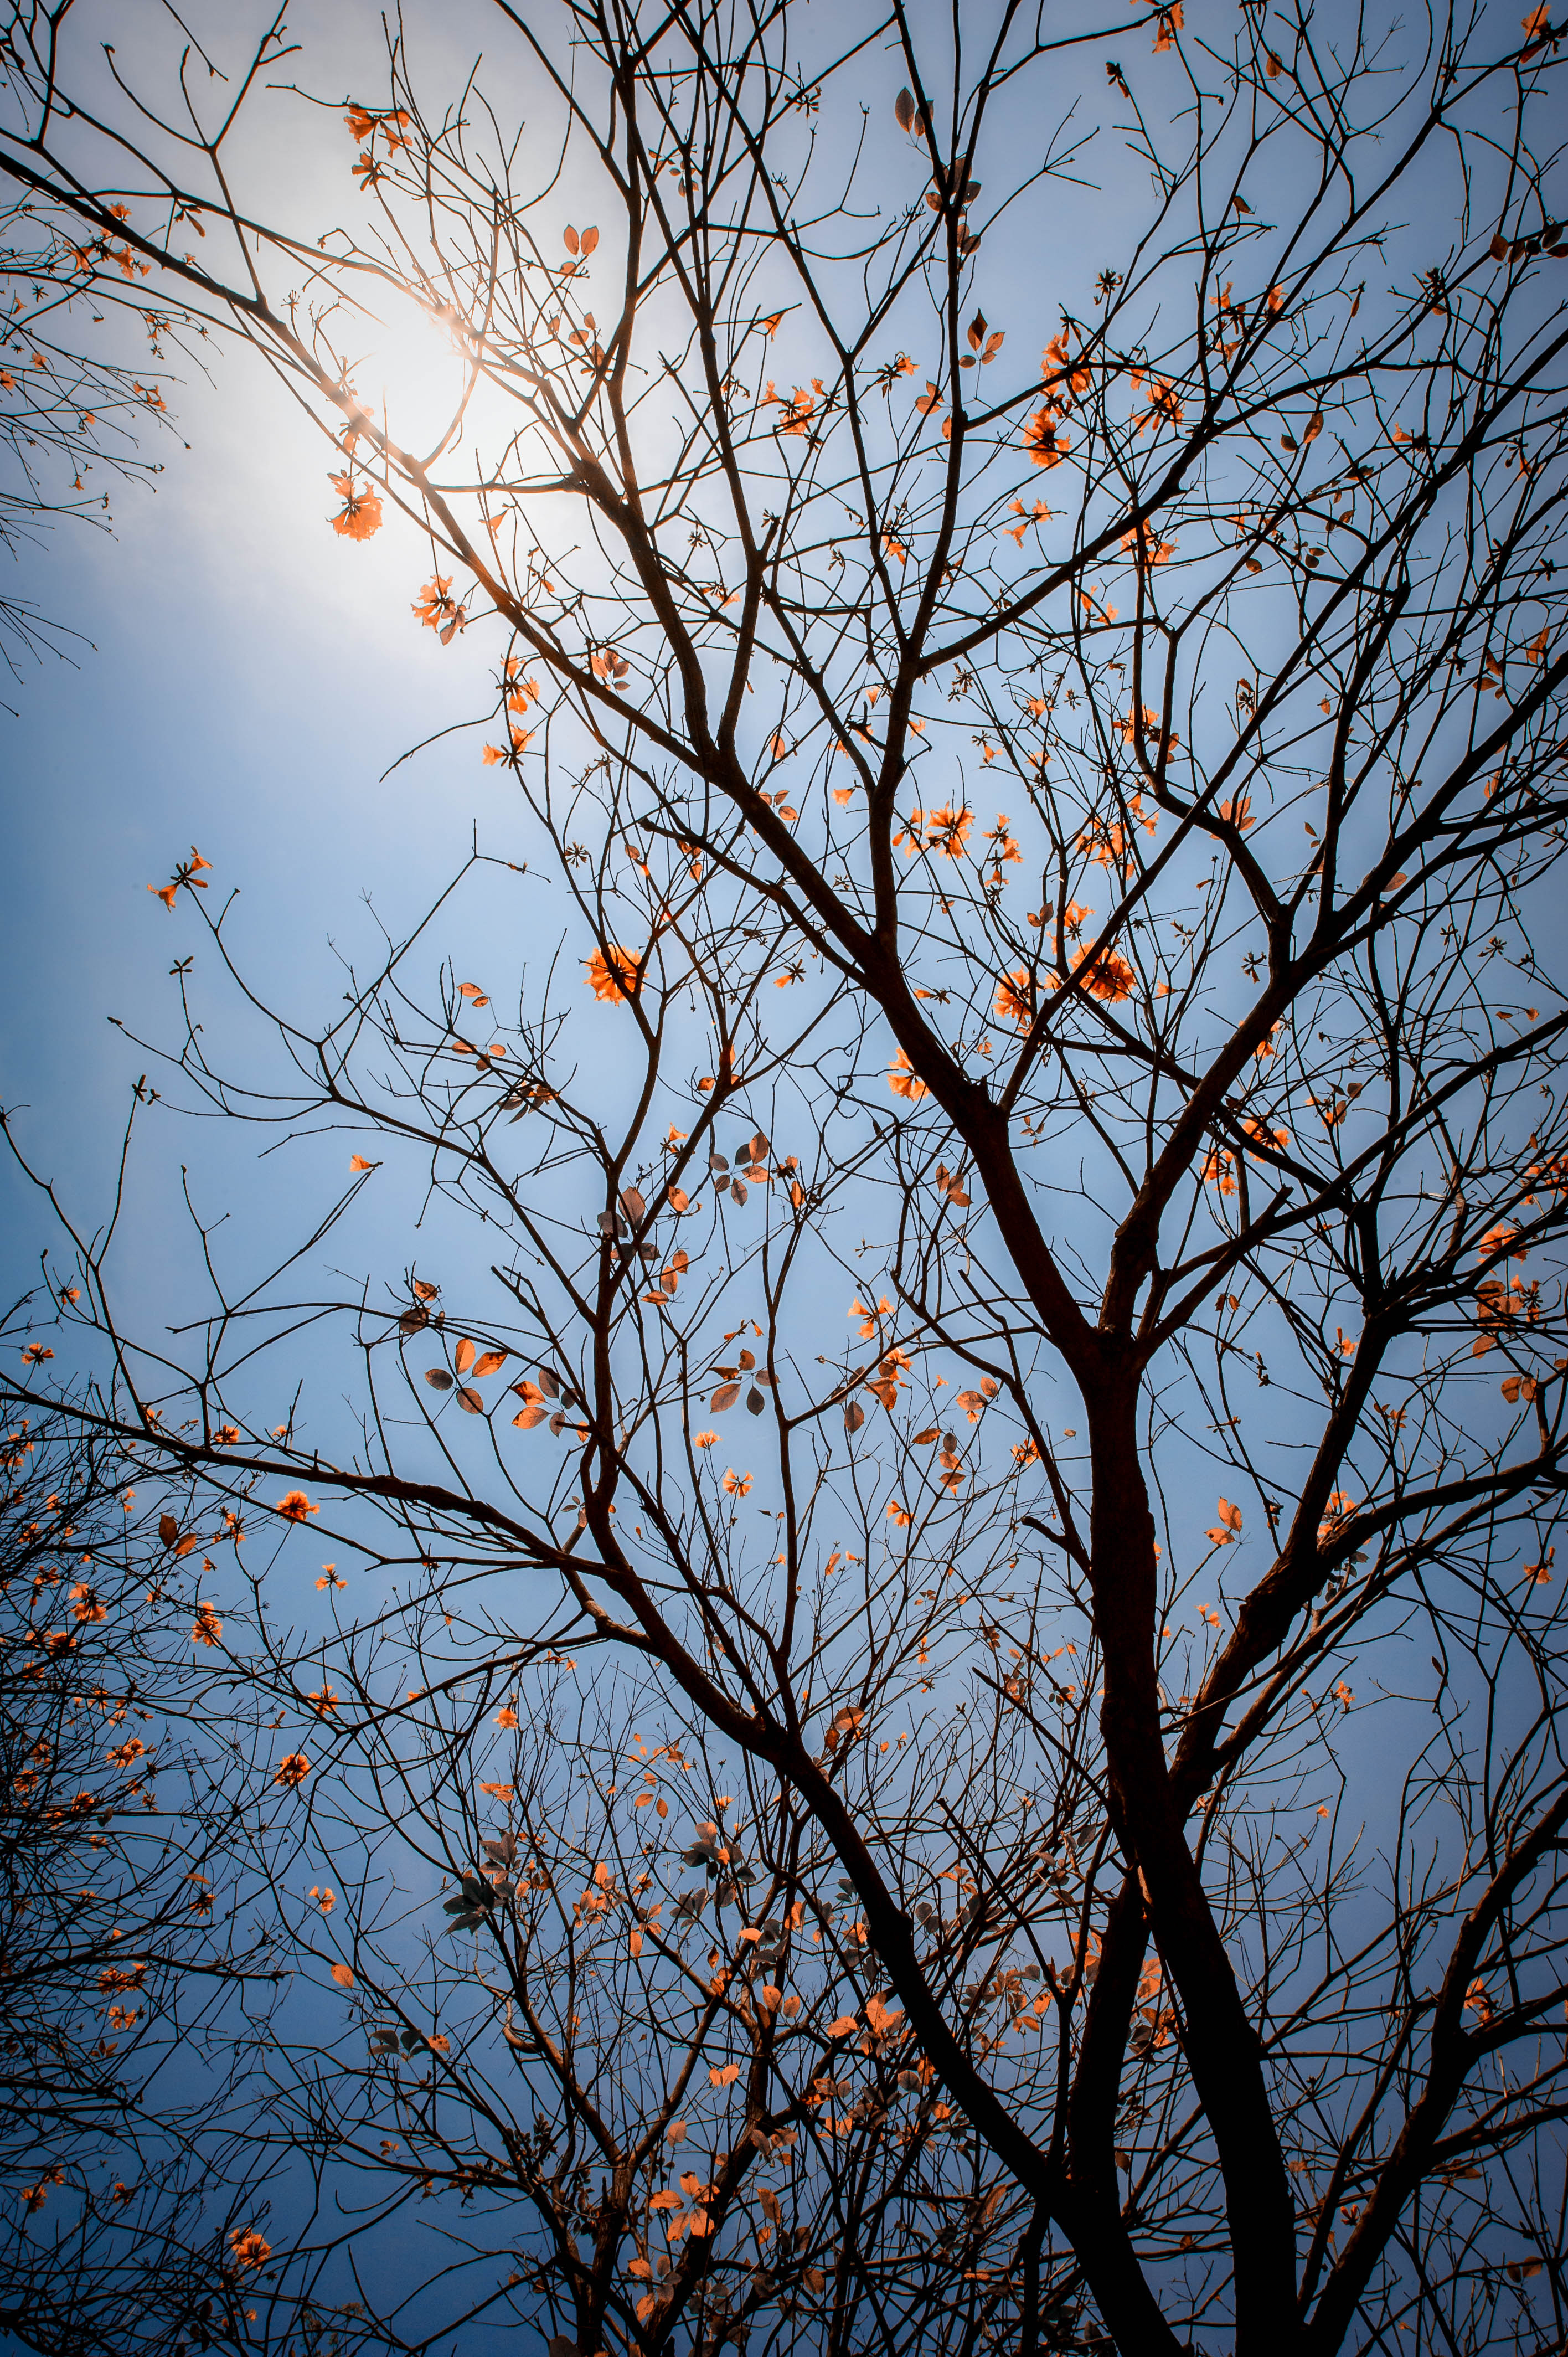 sky, wood, leaves, nature, flowers, tree, branches